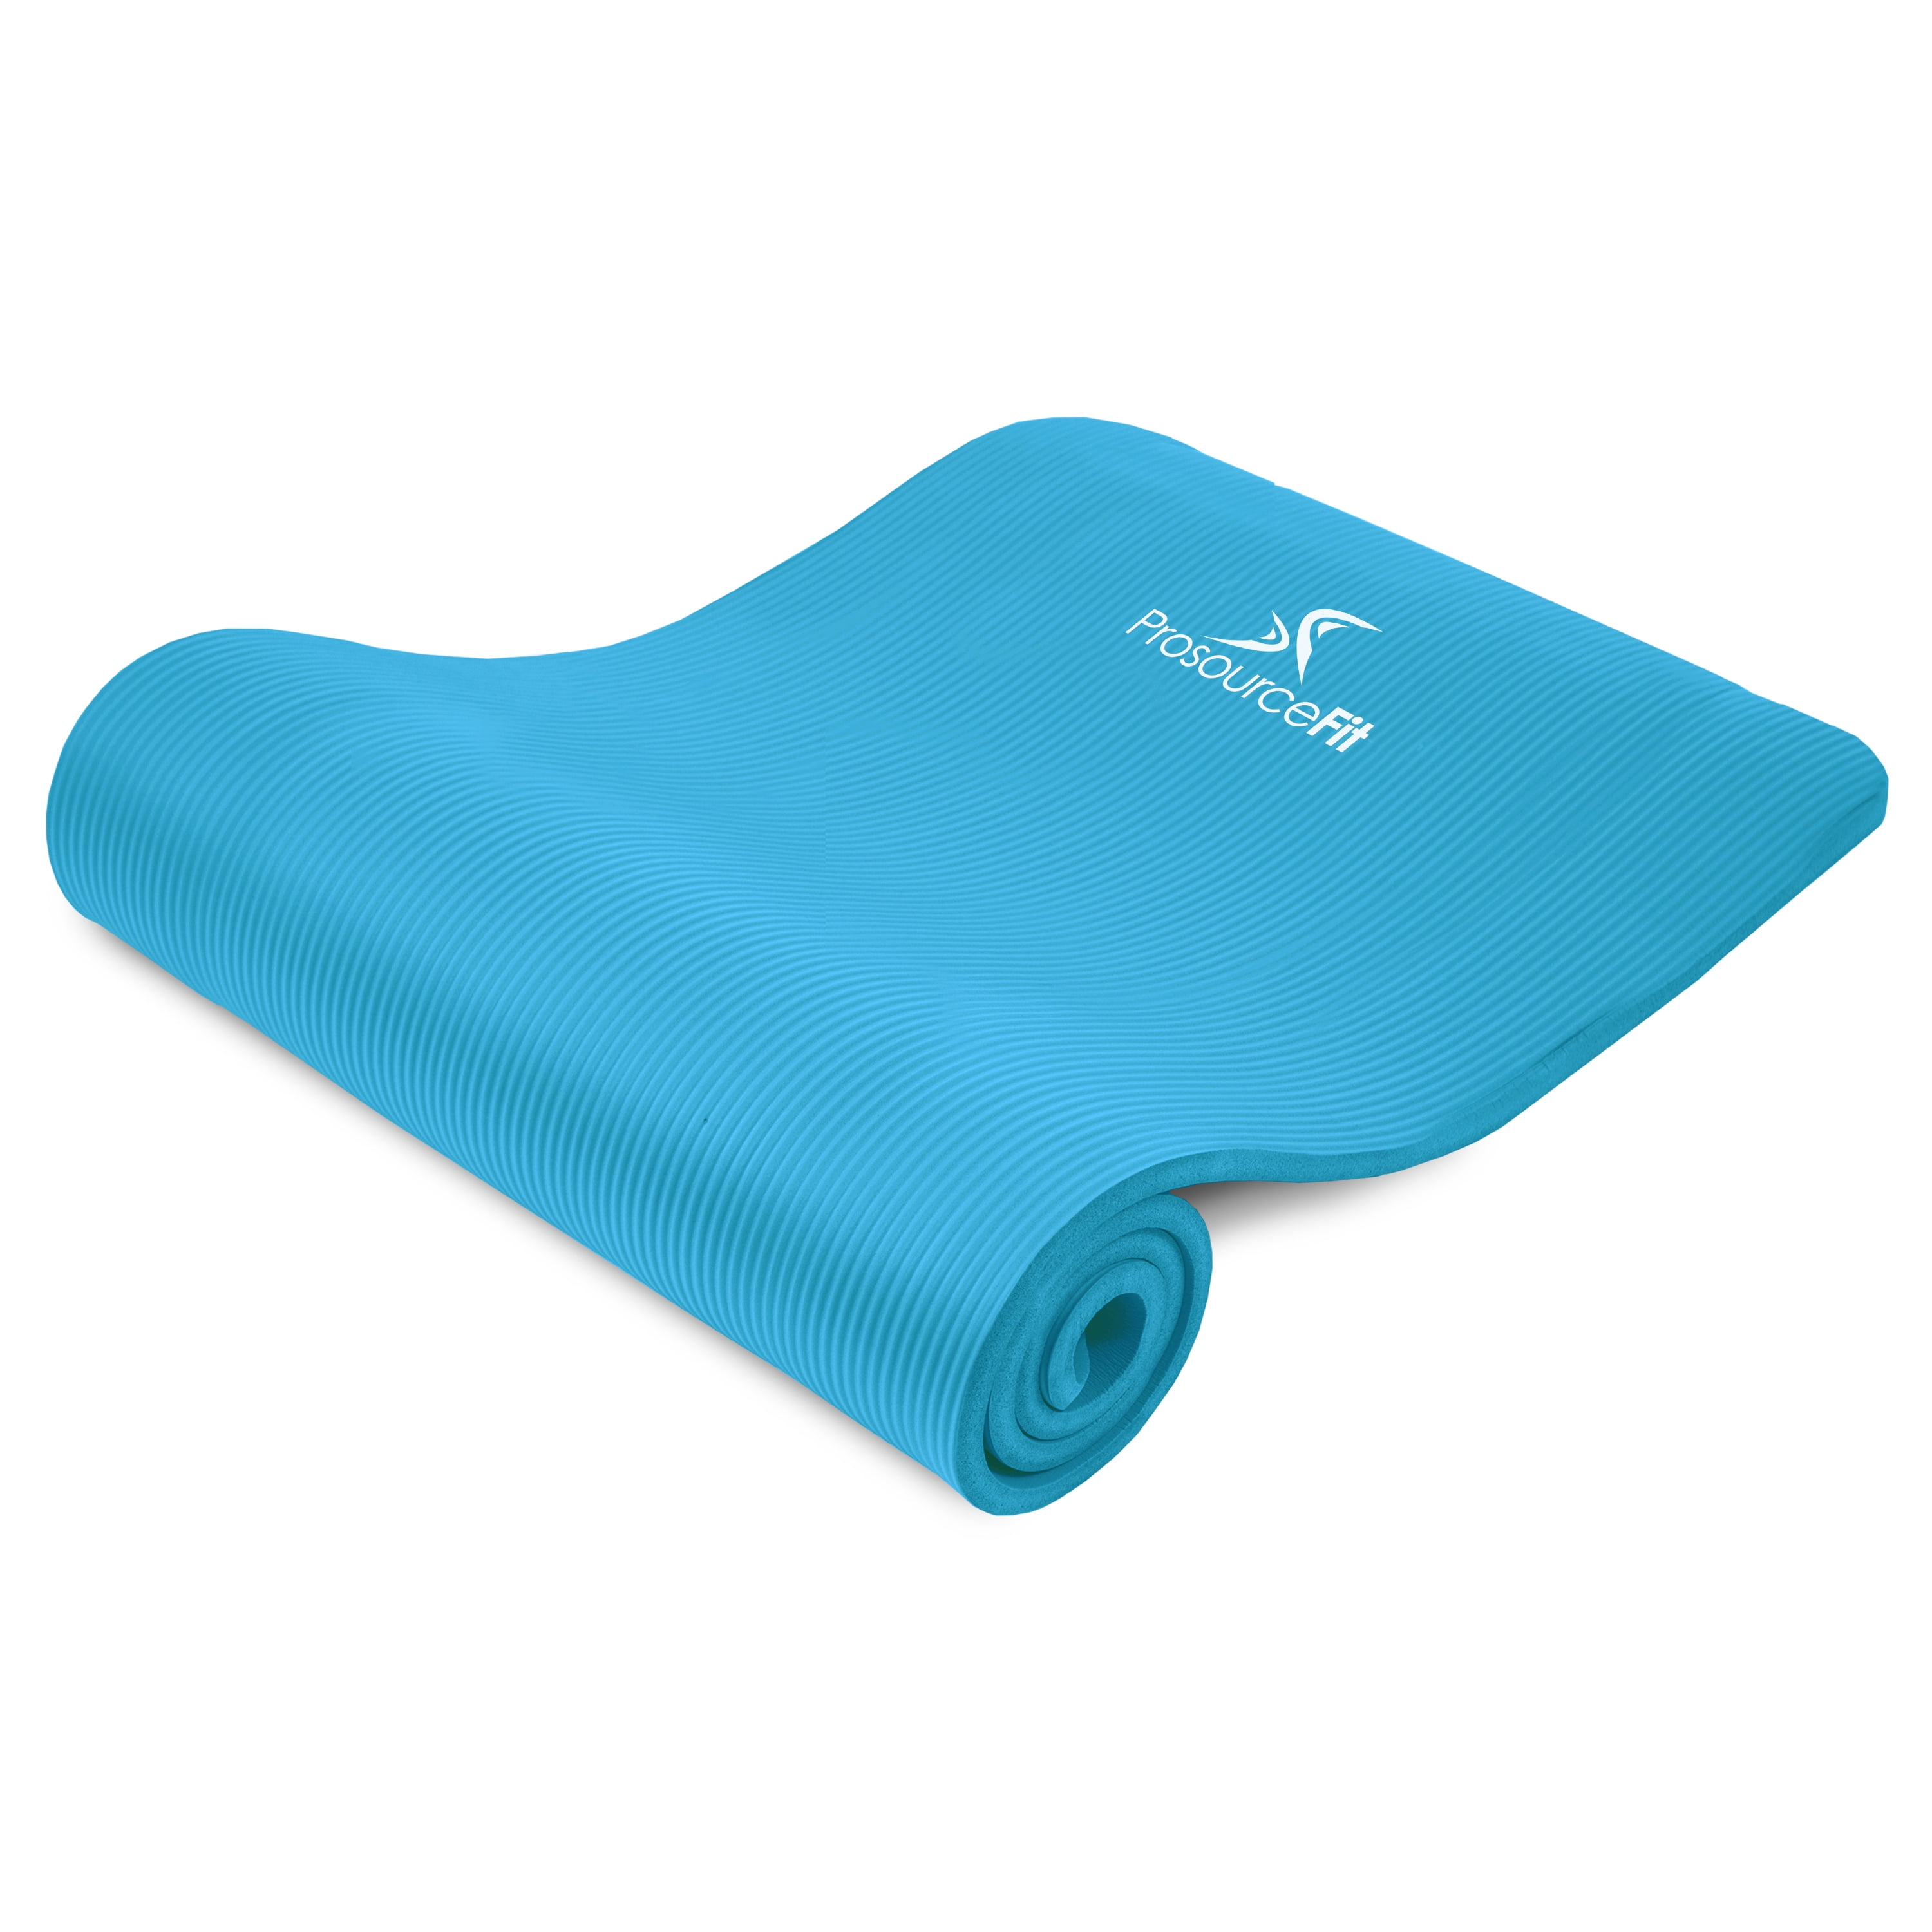 HemingWeigh 1/2-Inch Extra Thick High Density Exercise Yoga Mat with Carrying Strap for Exercise Yoga and Pilates 